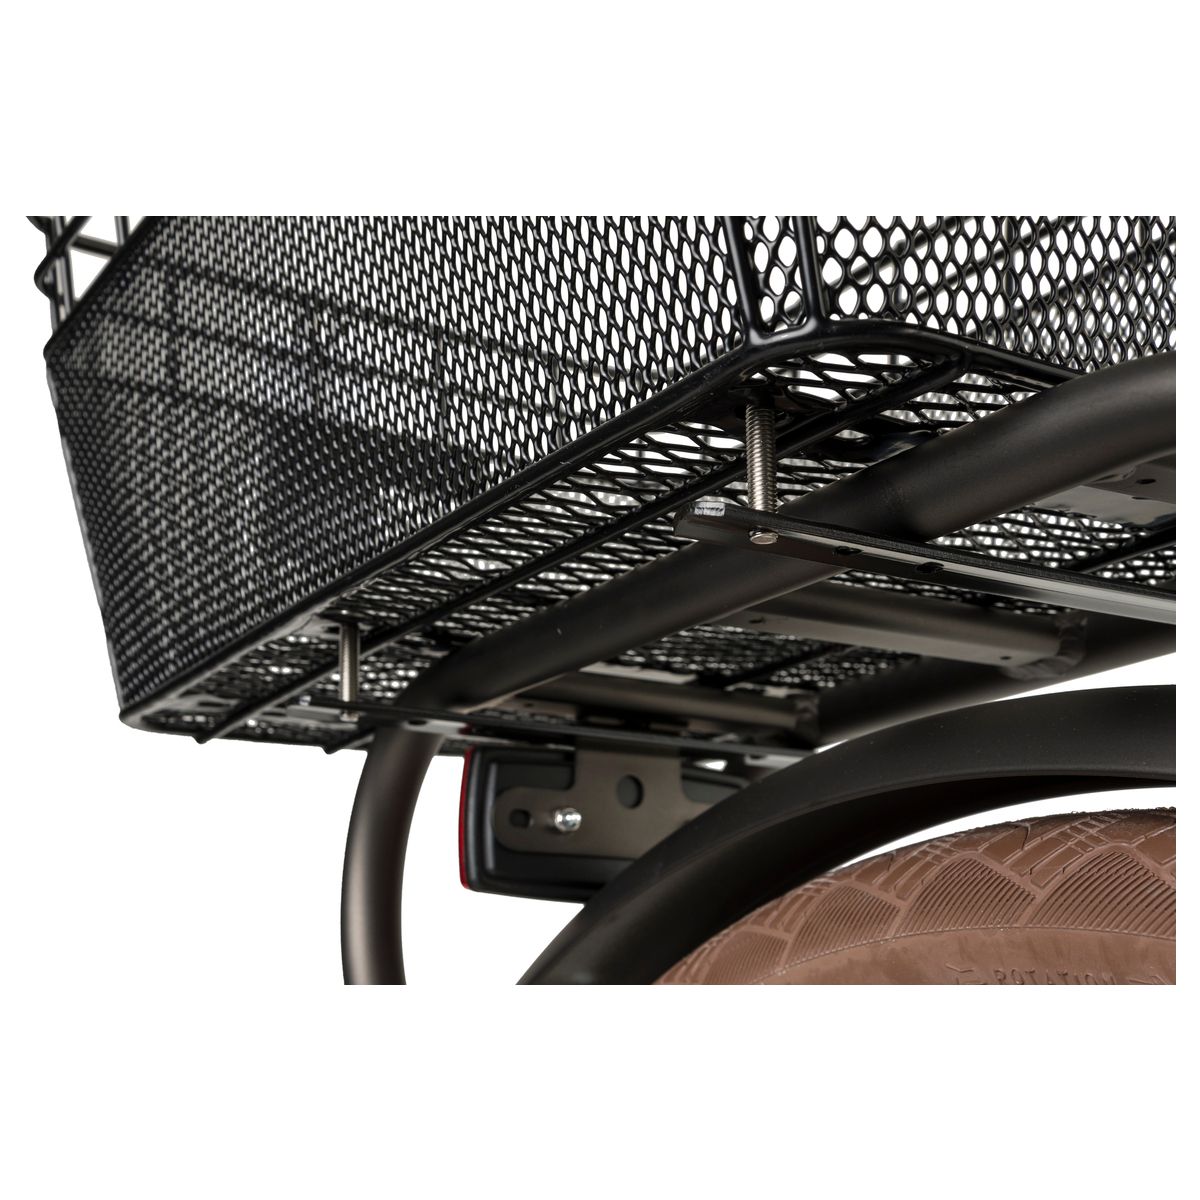 Fastrider Olav Rear Carrier Bicycle basket Non-Detachable fit example